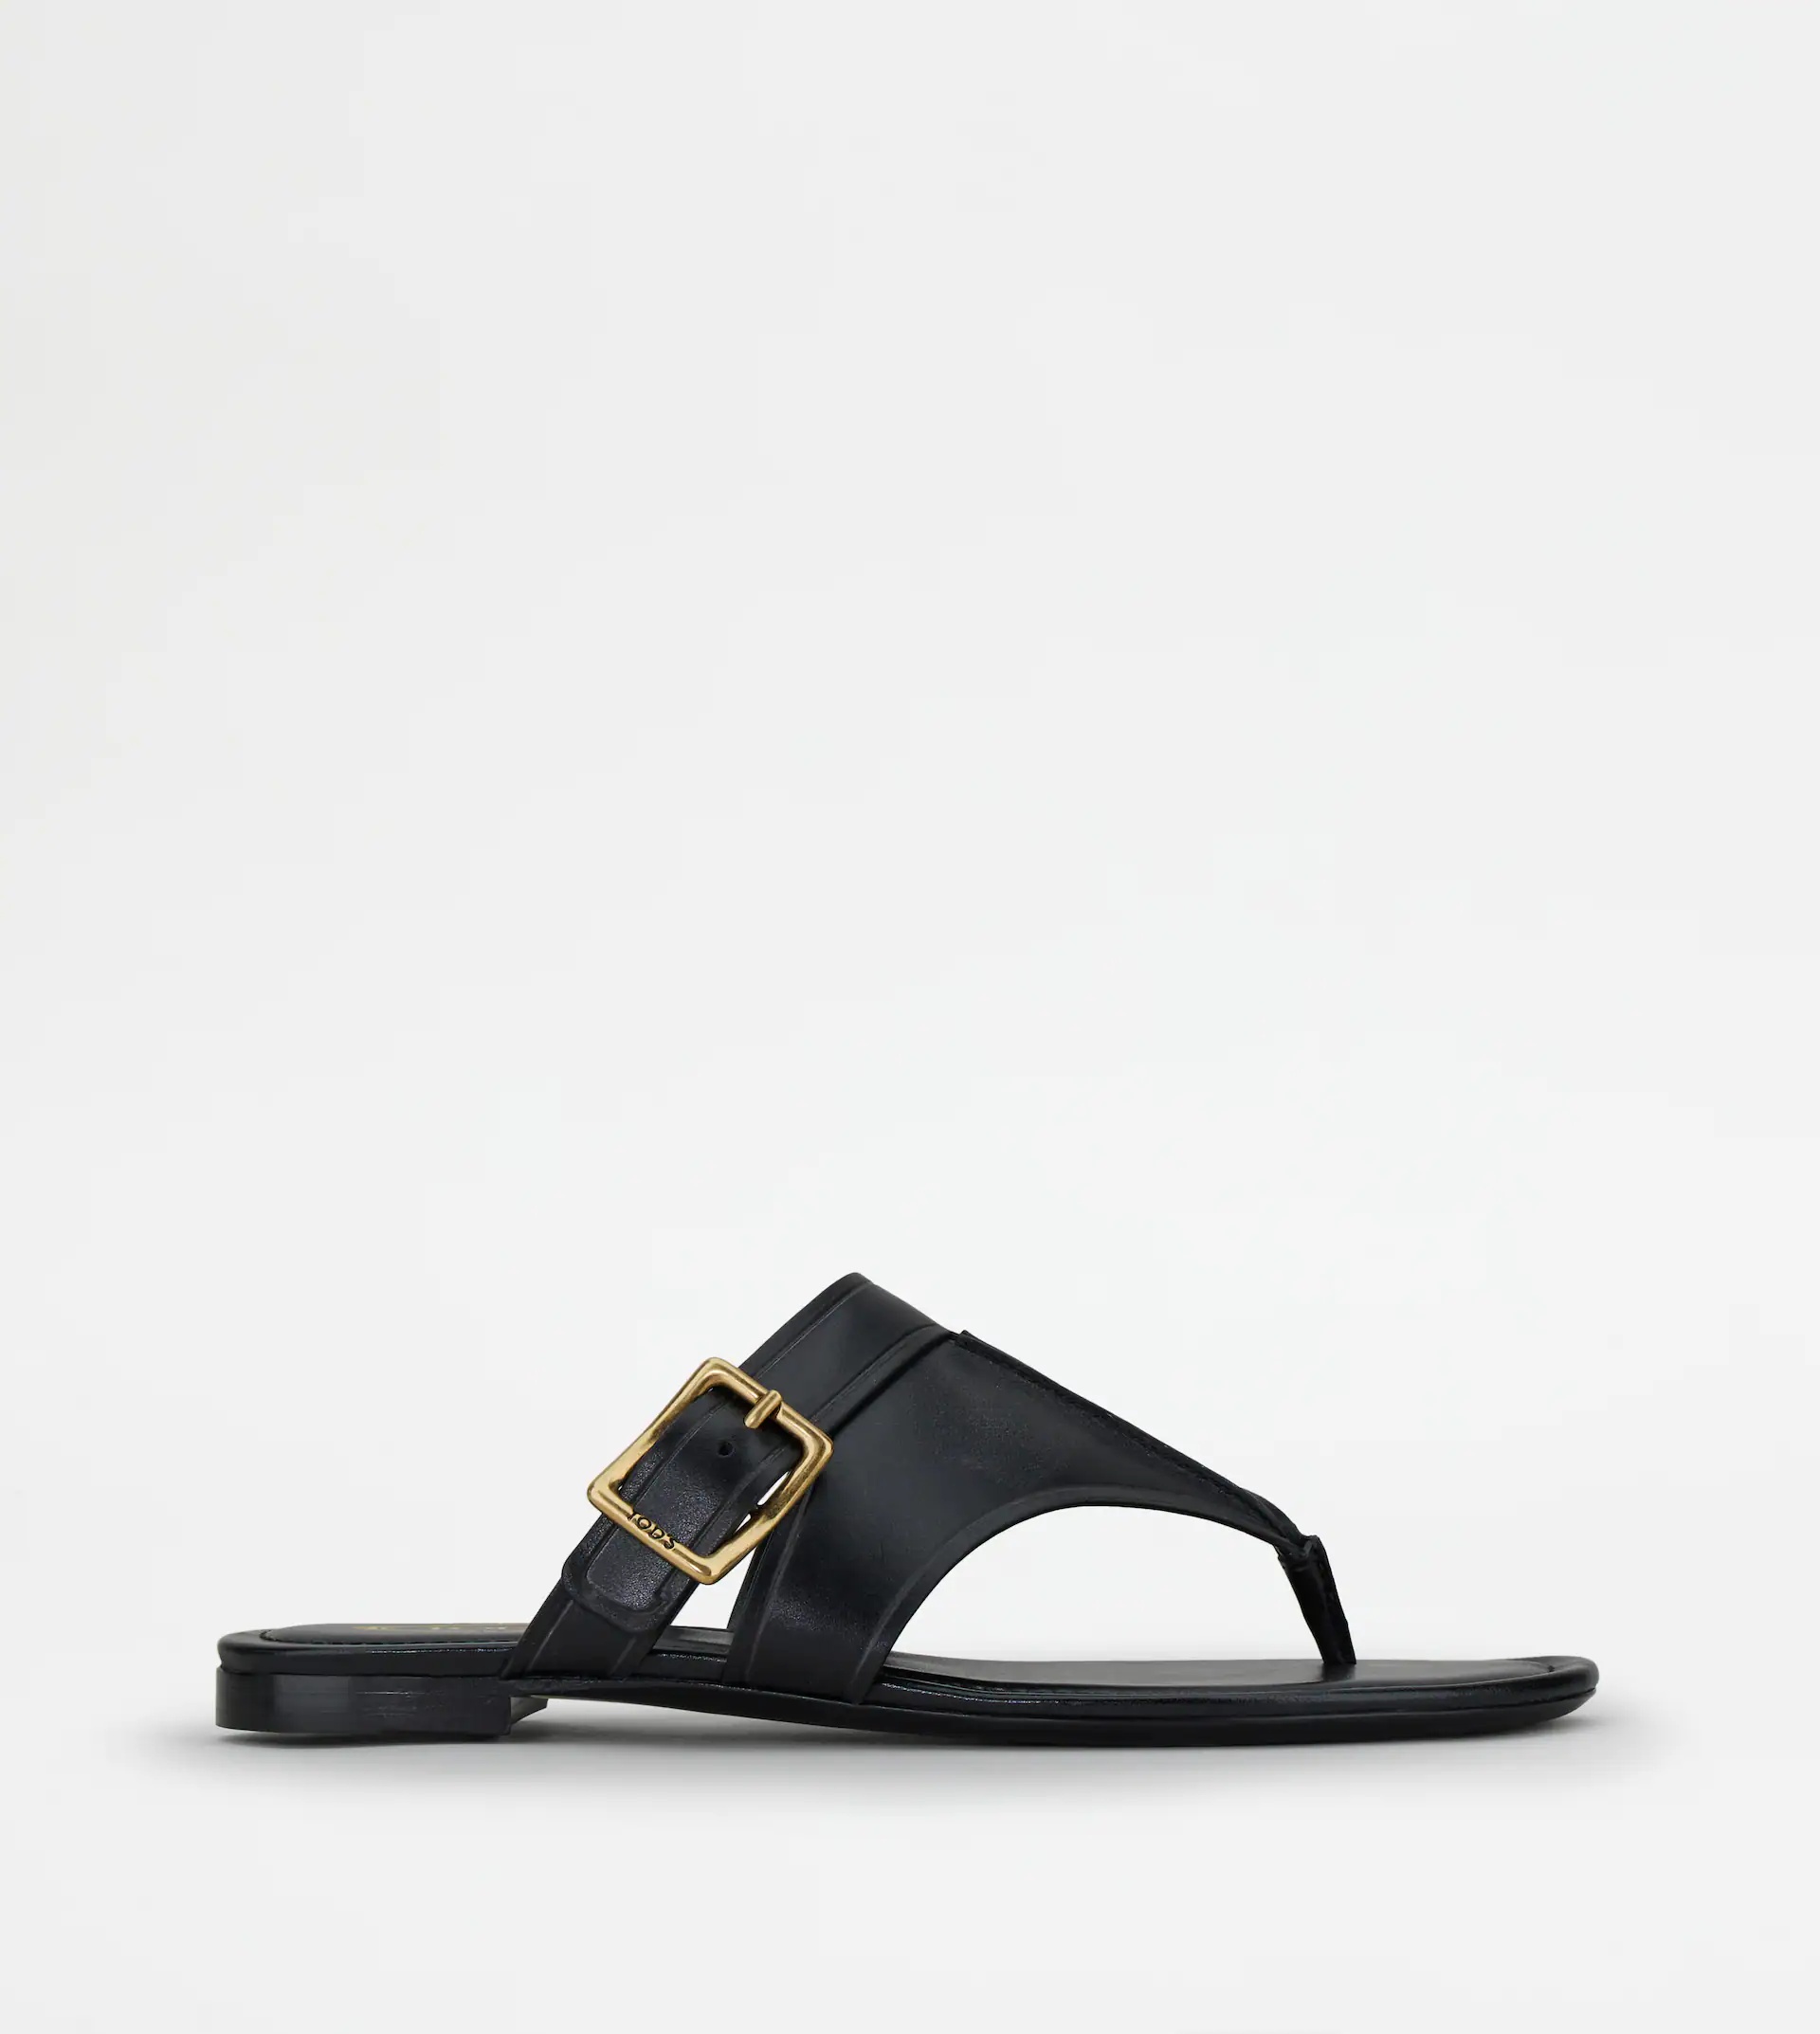 THONG SANDALS IN LEATHER - BLACK - 1